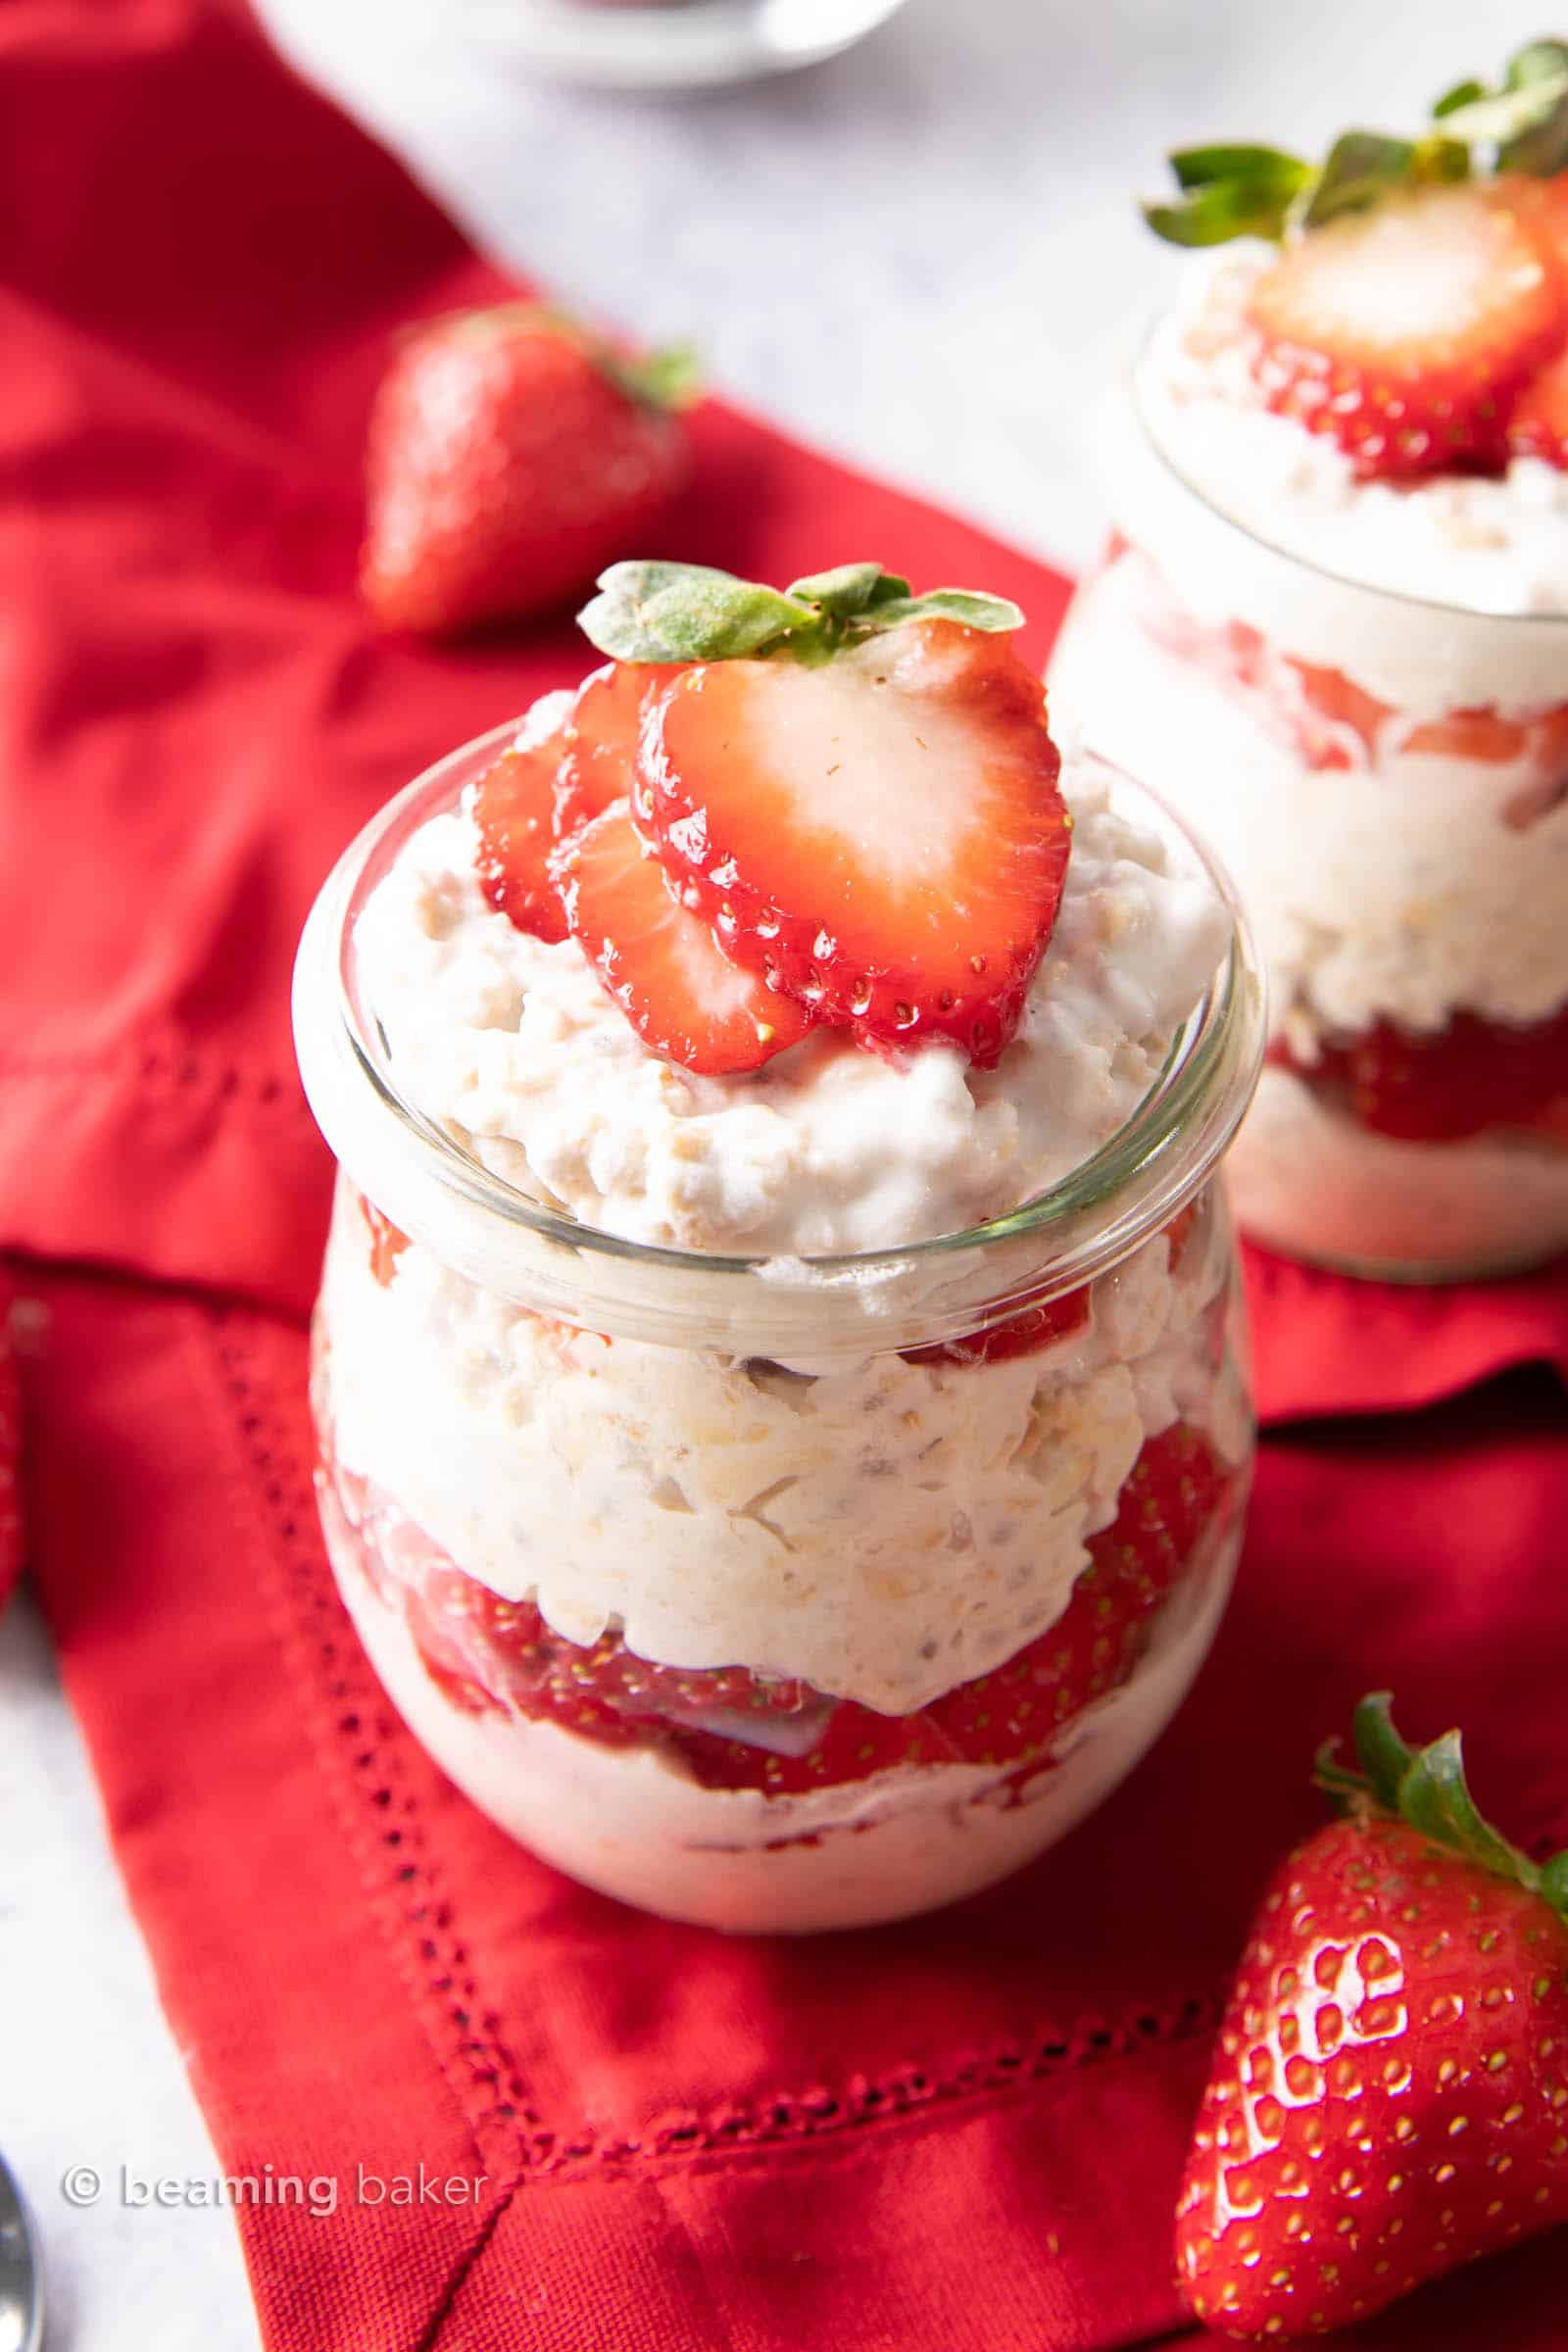 Strawberry Overnight Oats Recipe (Vegan): make easy vegan overnight oats that are thick & creamy! Simple ingredients for an easy, healthy breakfast! #Vegan #OvernightOats #OvernightOatmeal #Breakfast #Vegan | Recipe at BeamingBaker.com